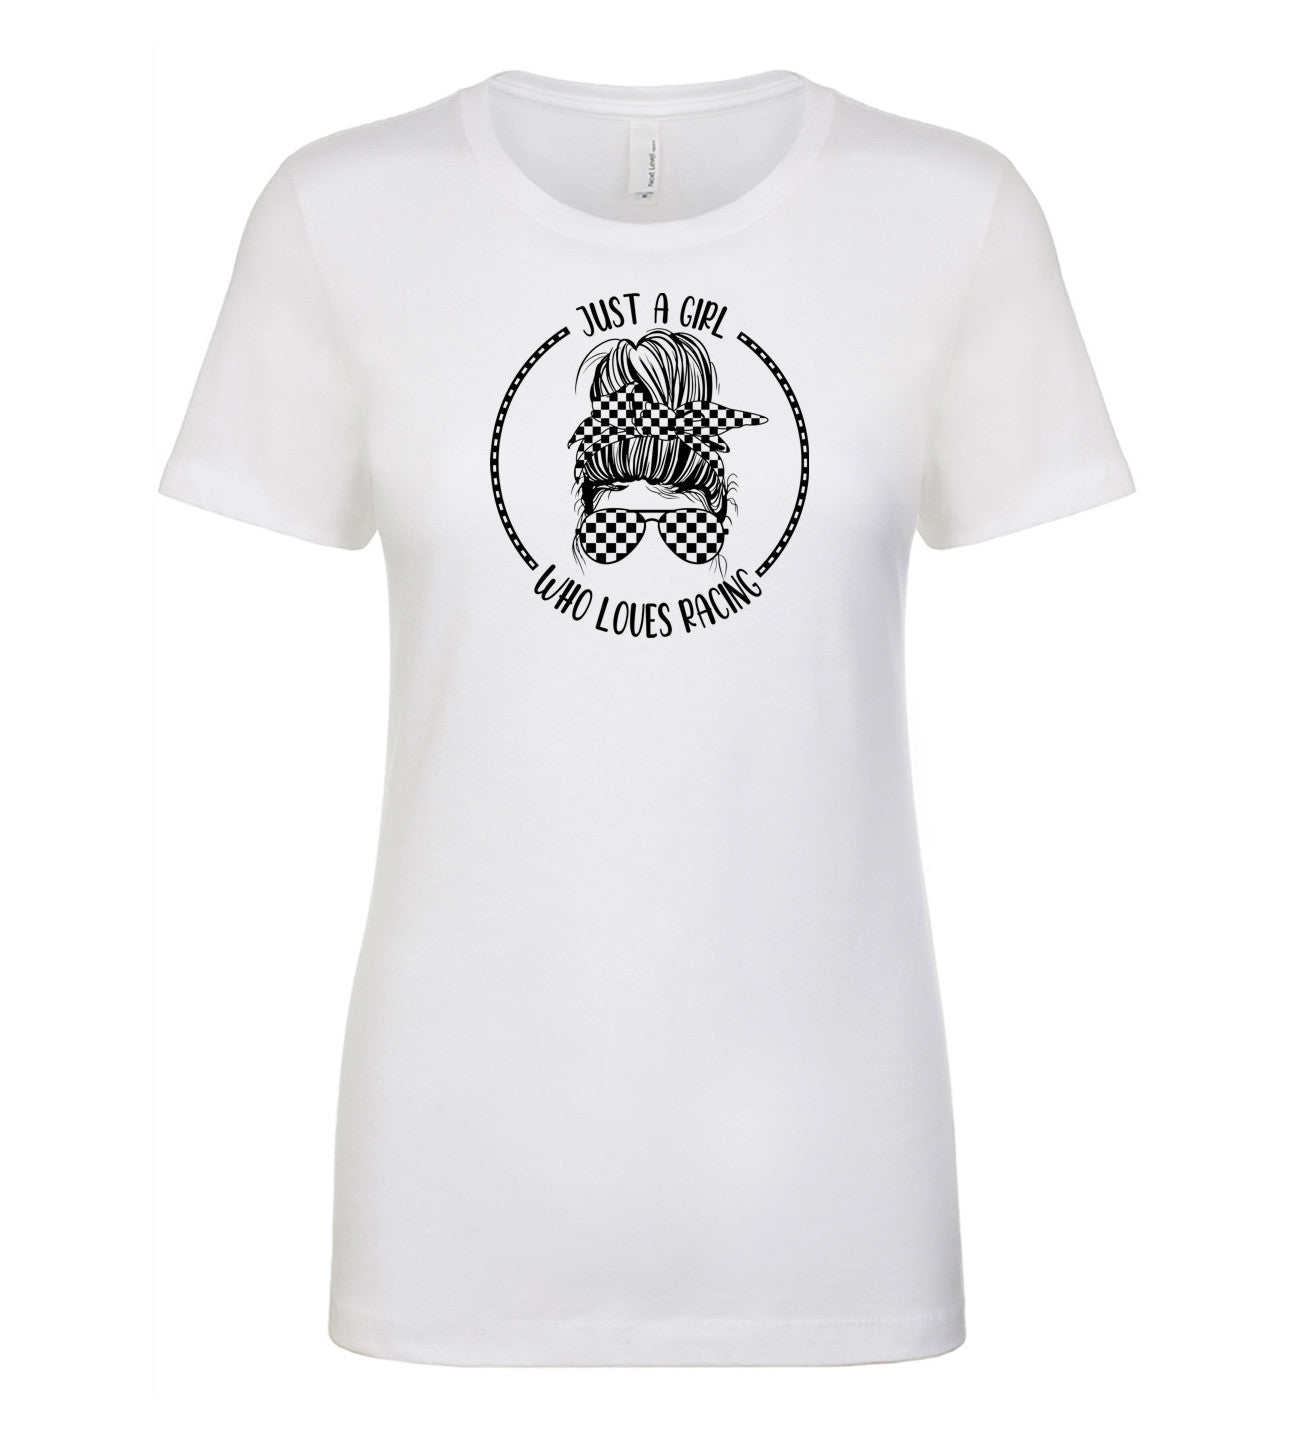 Just A Girl Who Loves Racing Ladies Tee